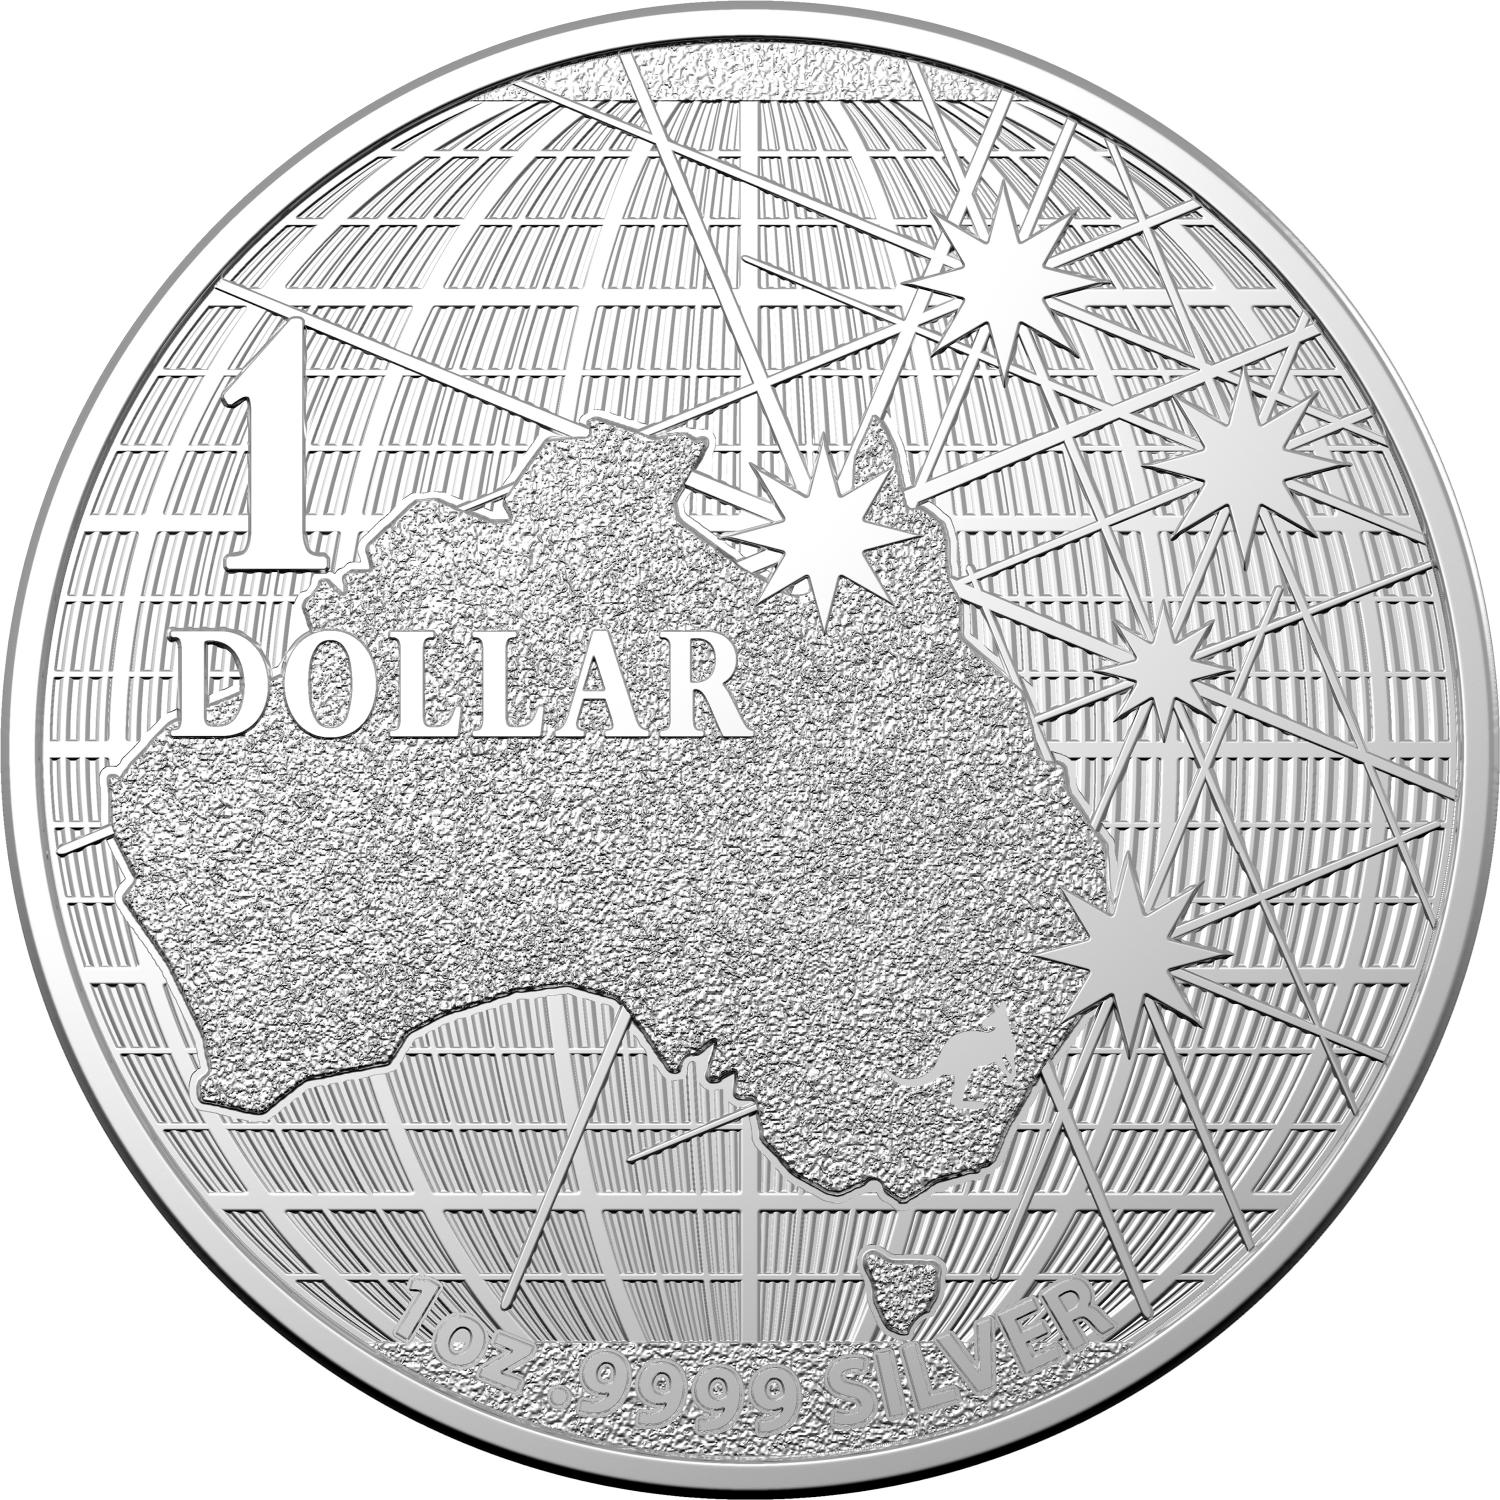 Thumbnail for 2020 $1 Beneath The Southern Skies Silver 99.9%Ag 1oz Brilliant UNC Coin in Capsule - Royal Australian Mint